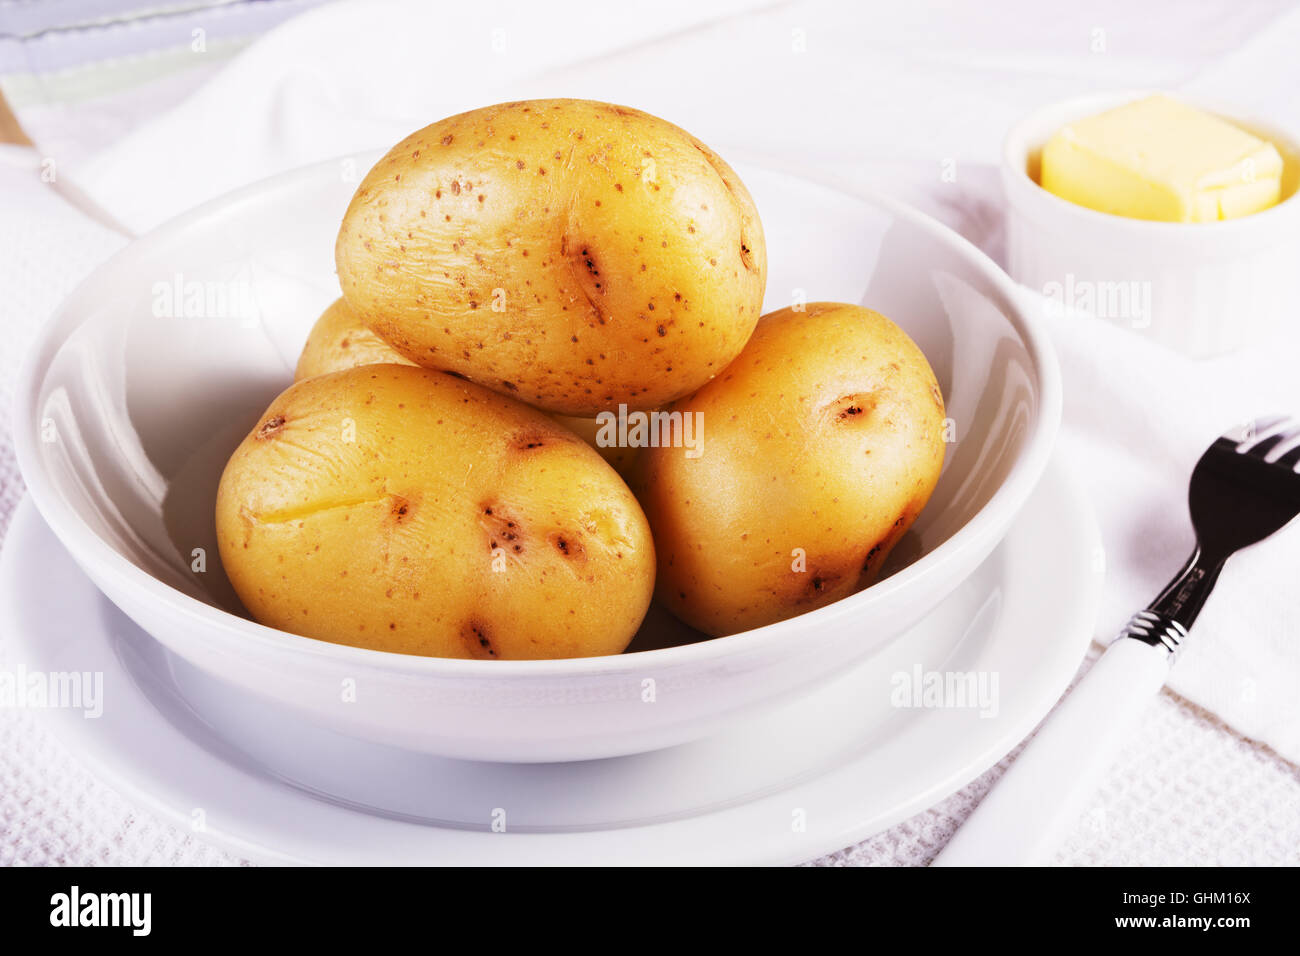 Boiled jacket potatoes served in a white bowl with butter Stock Photo